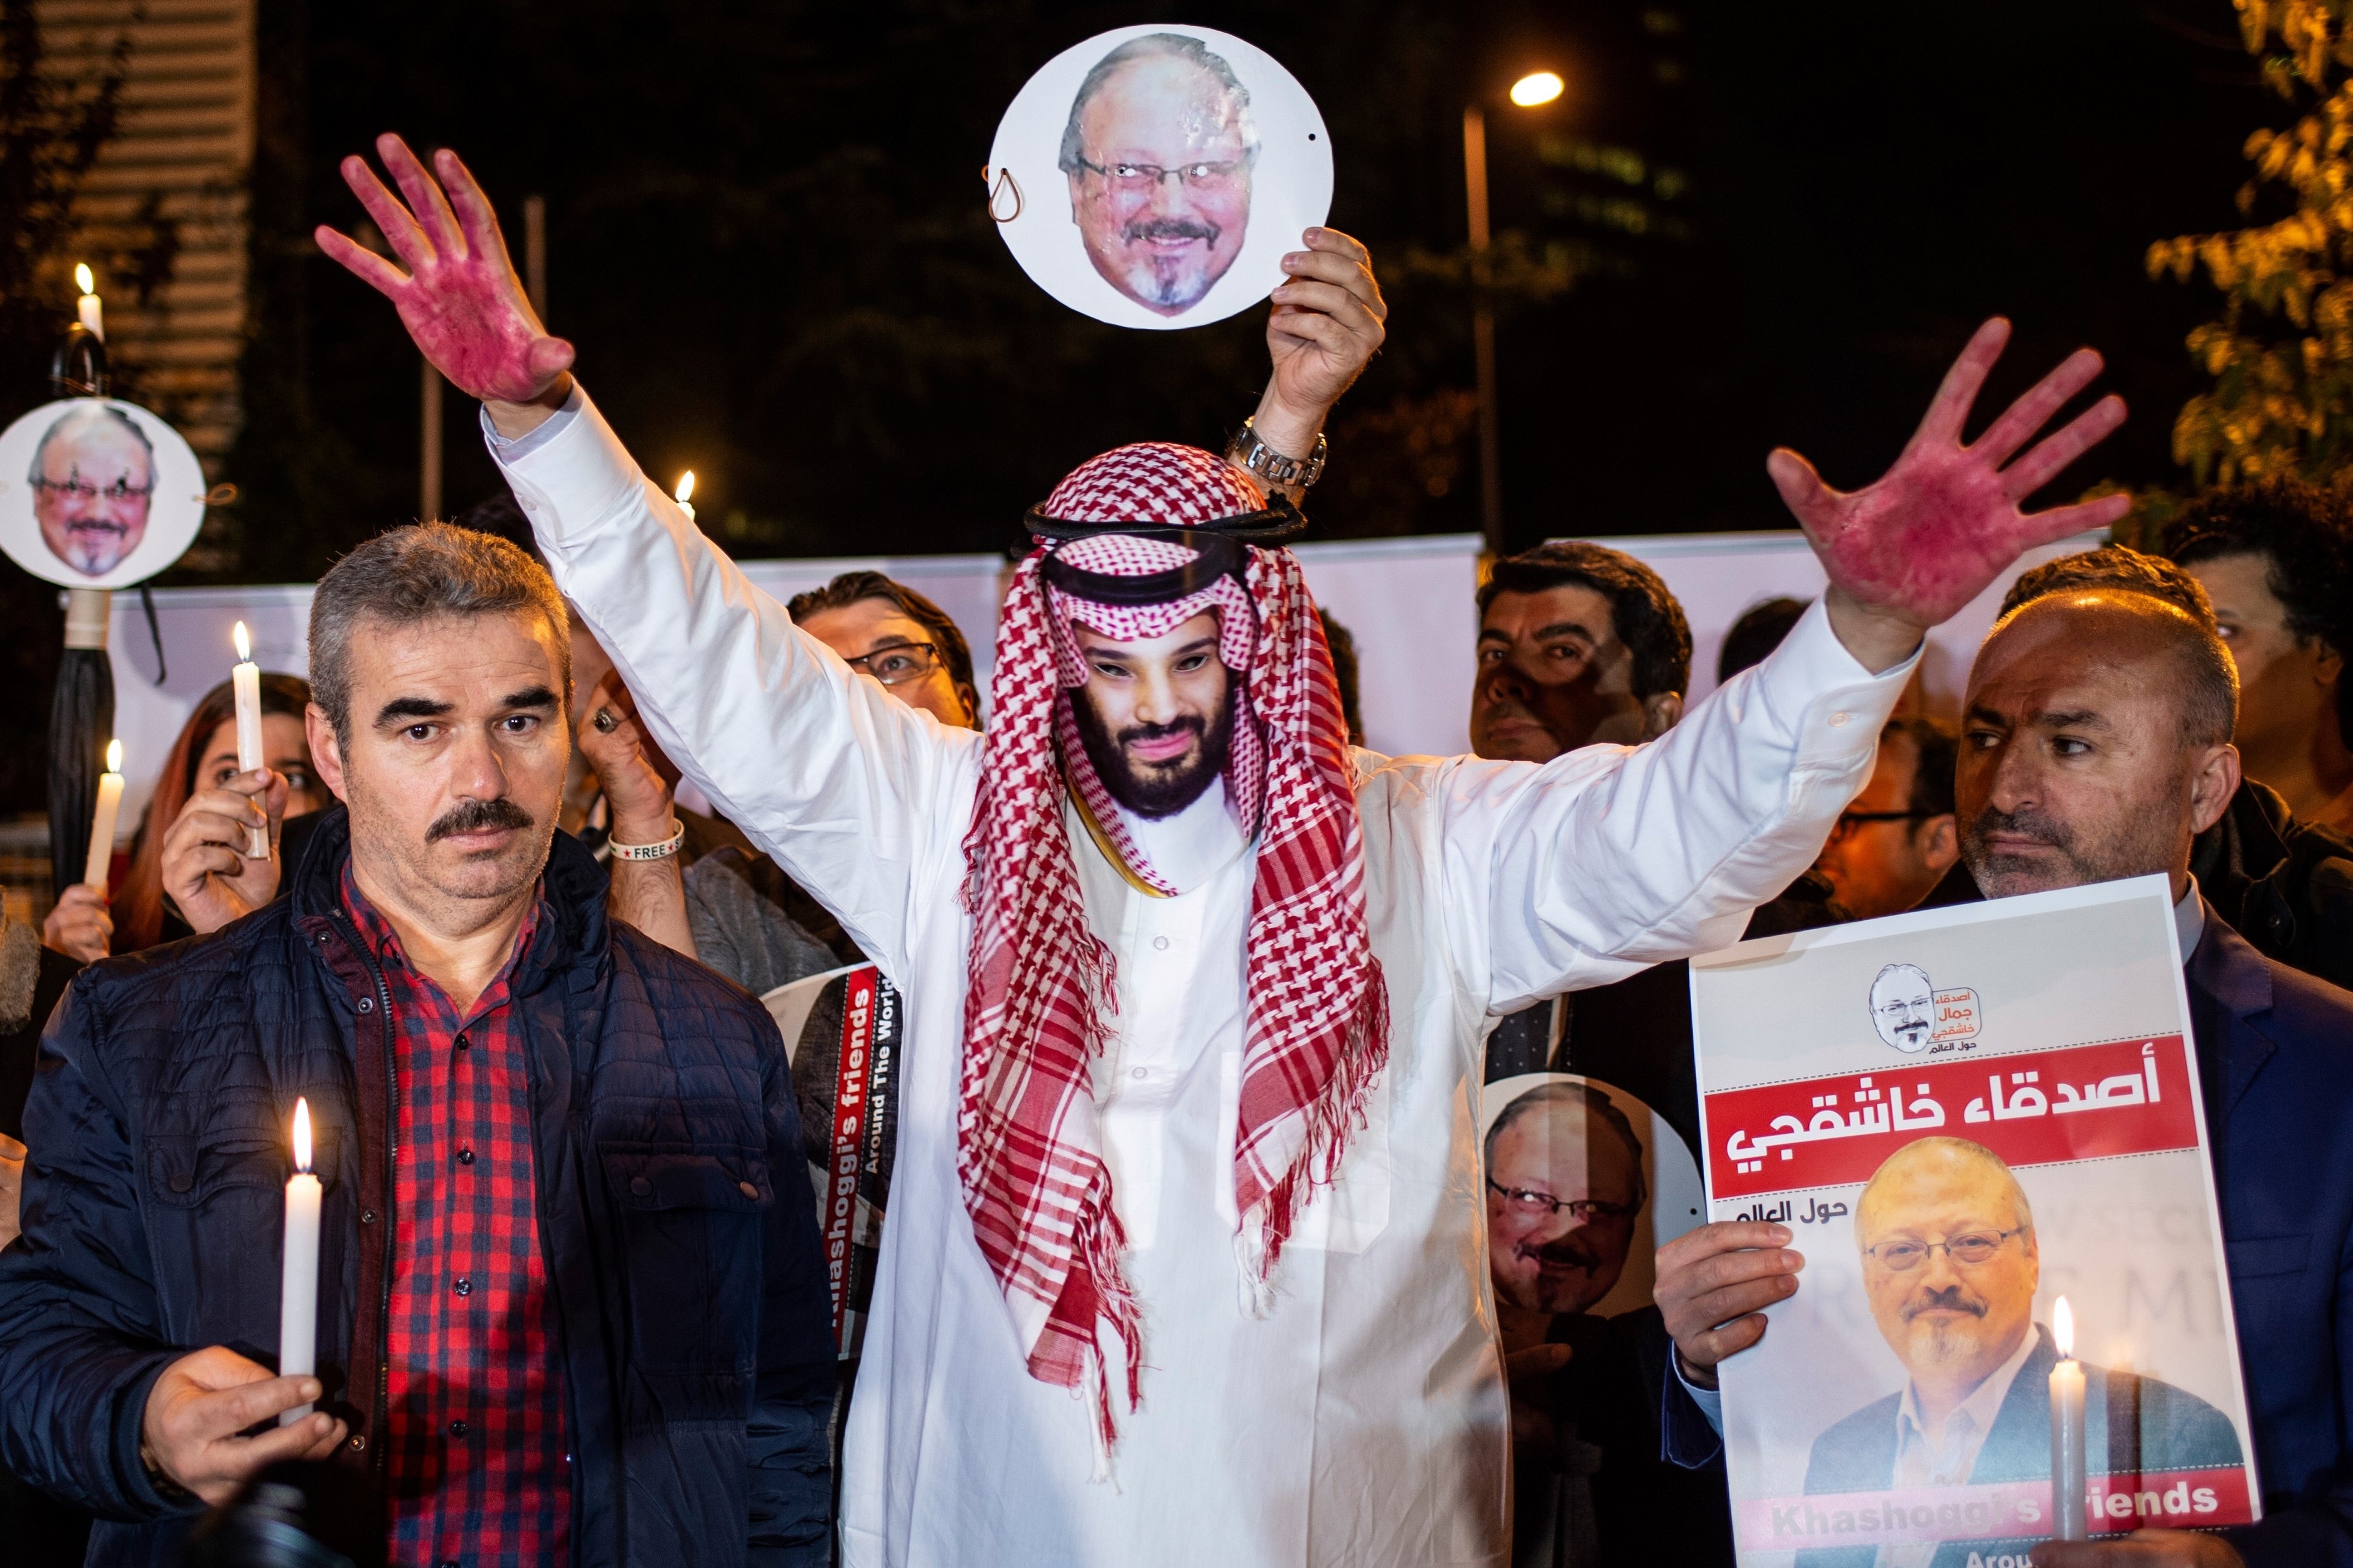 A protestor wears a mask of depicting Saudi Crown Prince Mohammad Bin Salman with red painted hands next to people holding posters of Saudi journalist Jamal Khashoggi during the demonstration outside the Saudi Arabia consulate in Istanbul, on 25 October, 2018 (AFP)